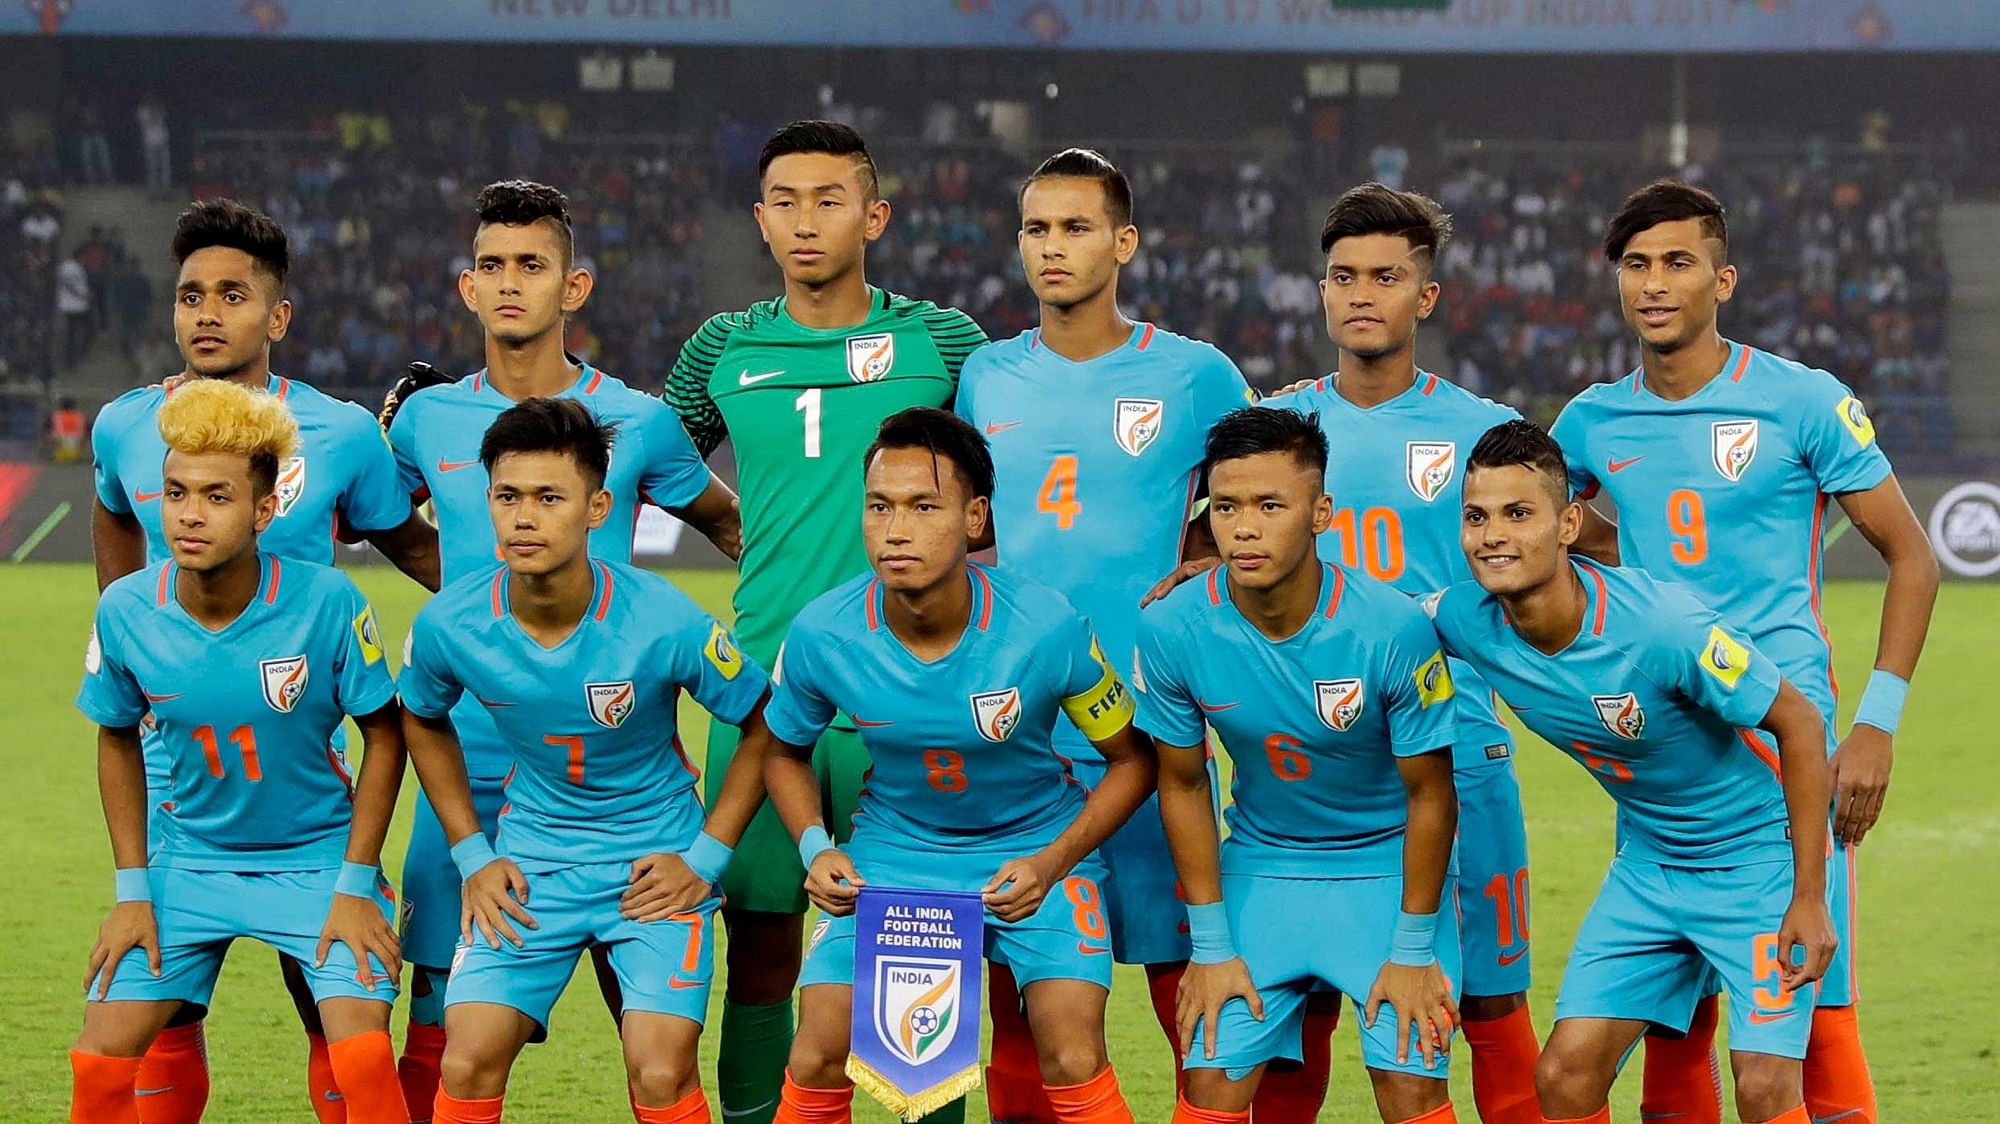 Did the Indian Football Team Deserve a Berth in the Asian Games?The Quint DAILY